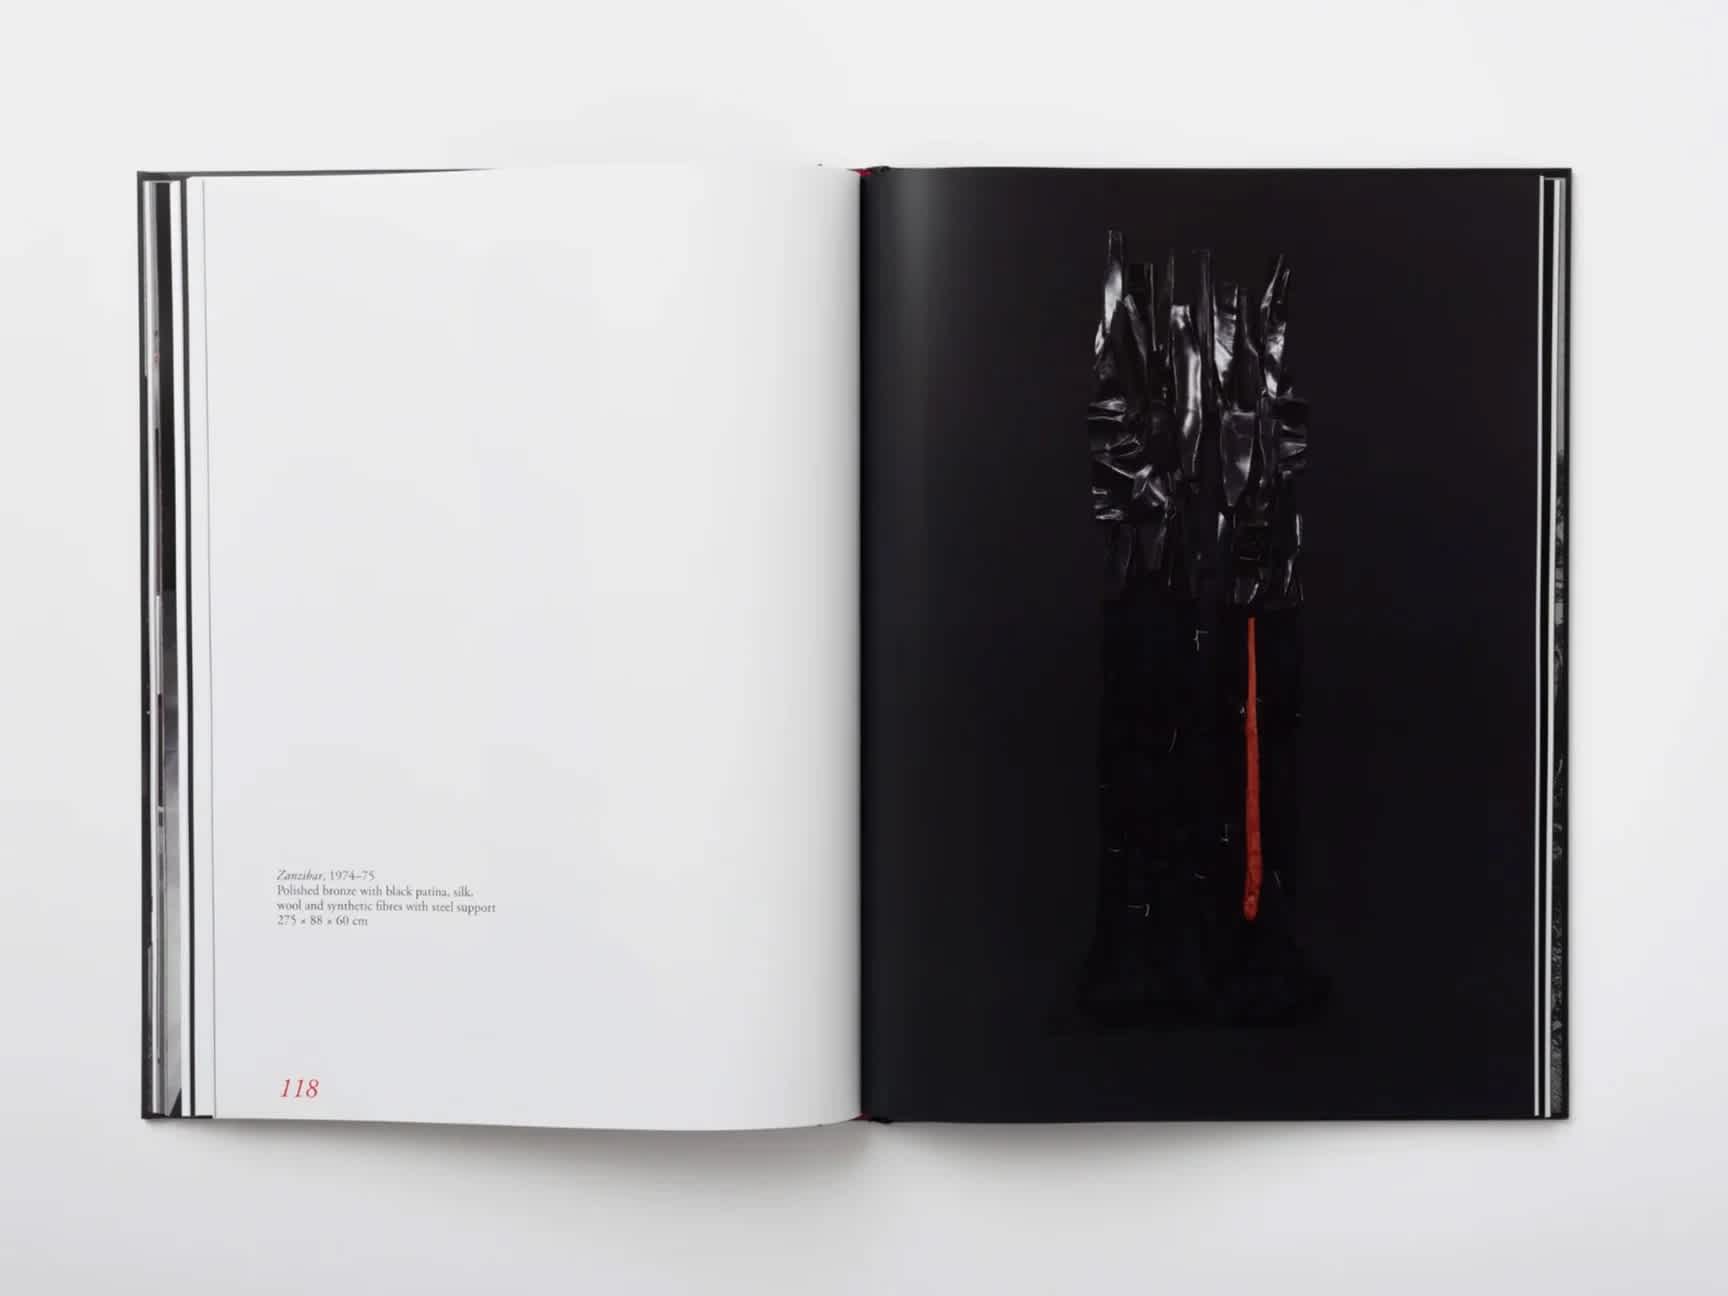 An open book in which the left page is white and the right page features a black metal sculpture in a black room.